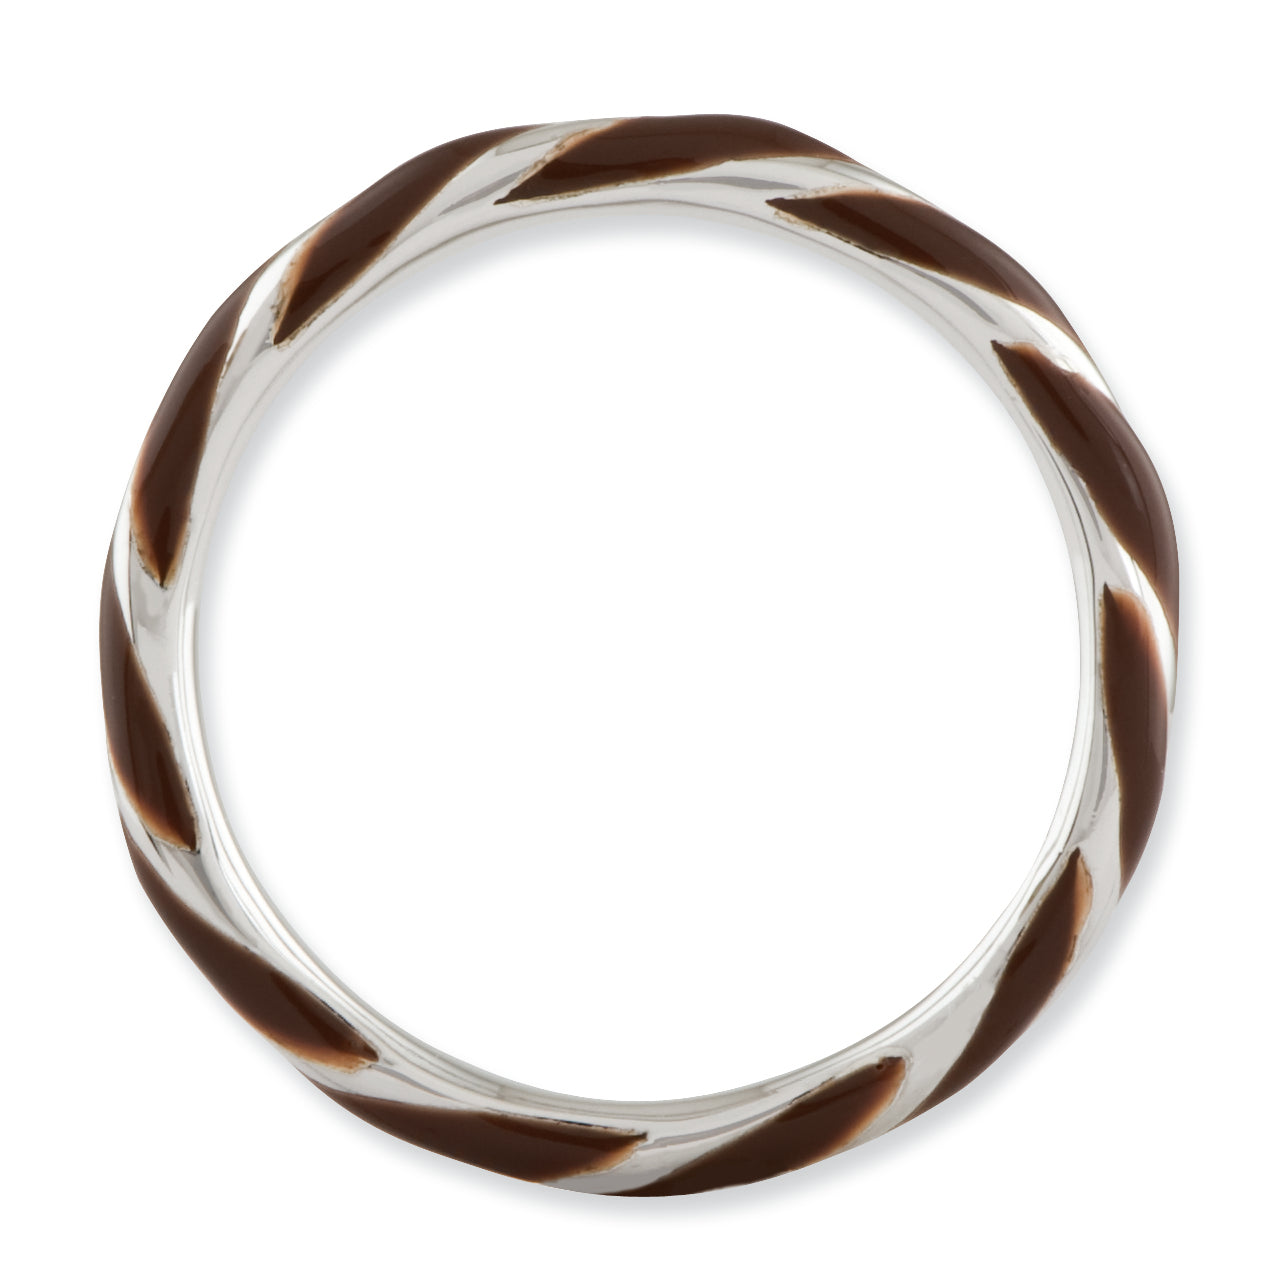 Sterling Silver Stackable Expressions Twisted Brown Enameled Ring